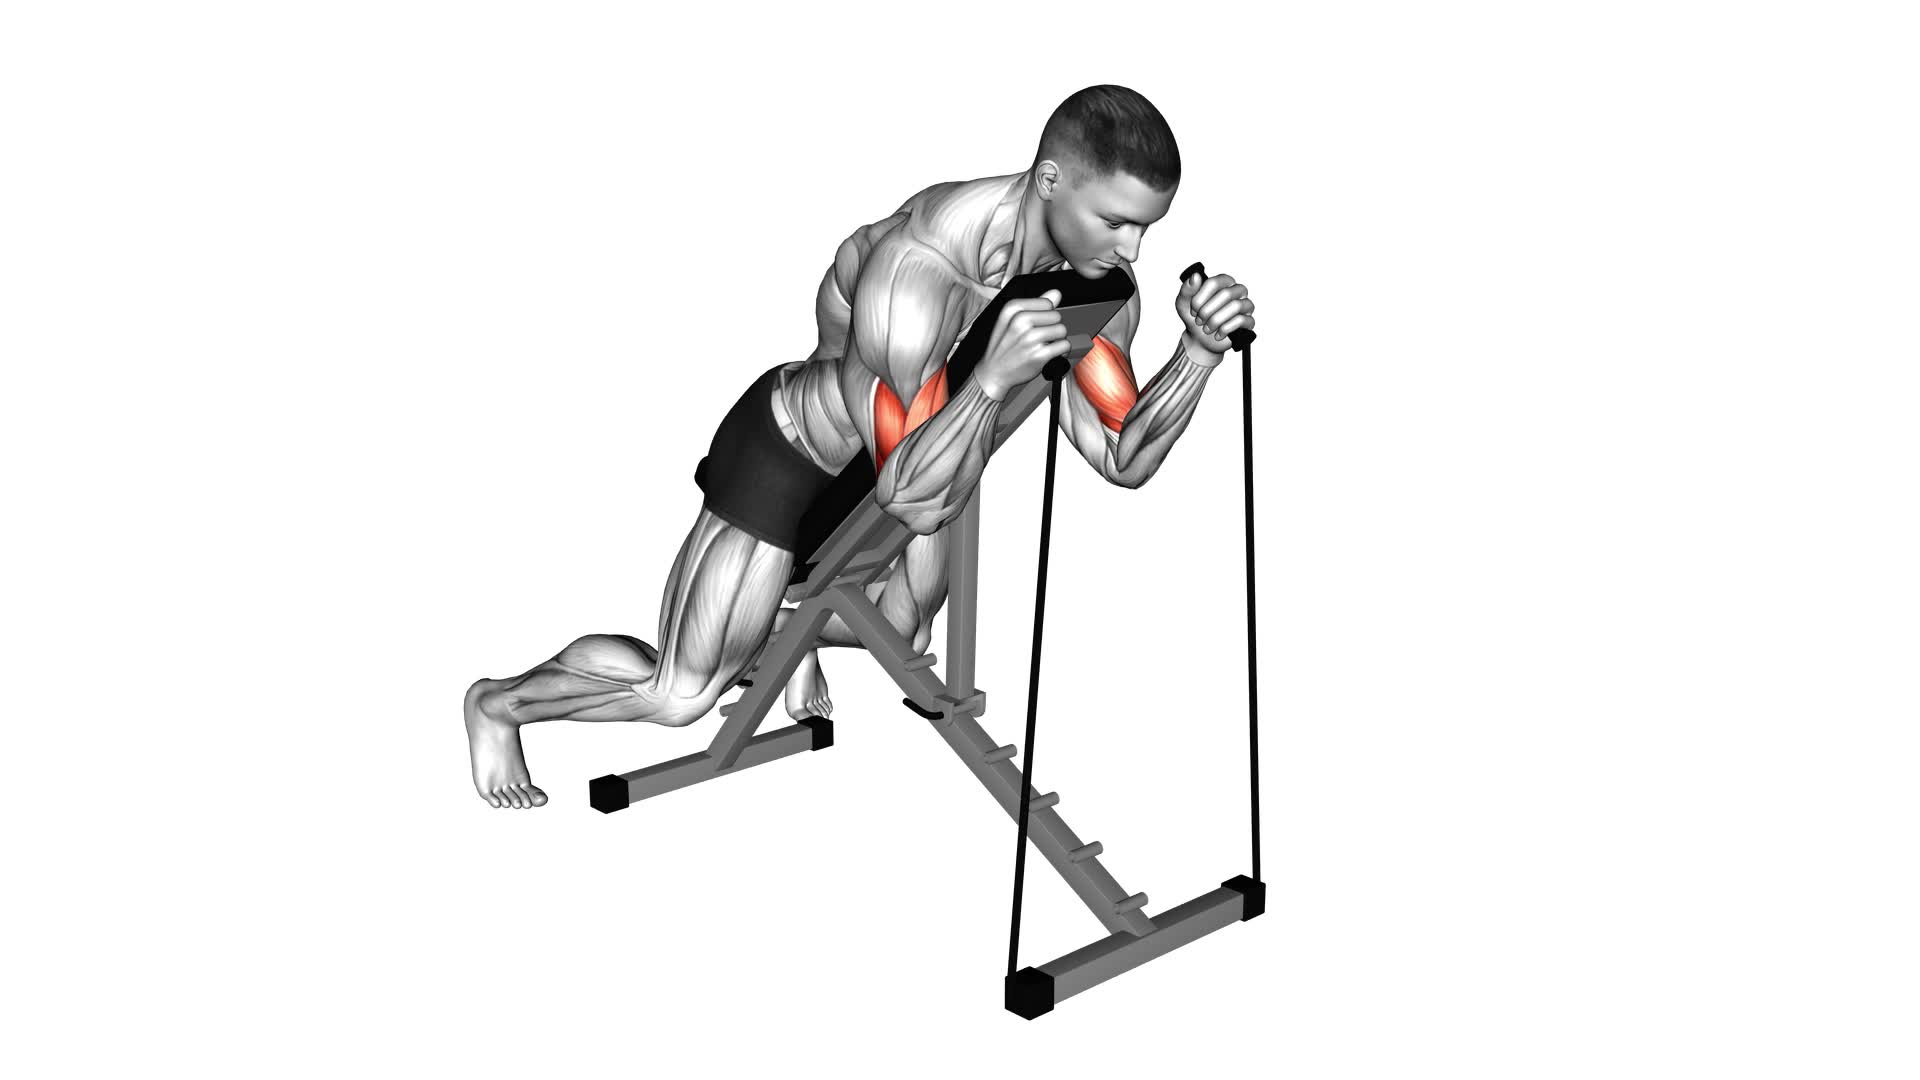 Band Prone Incline Hammer Curl - Video Exercise Guide & Tips